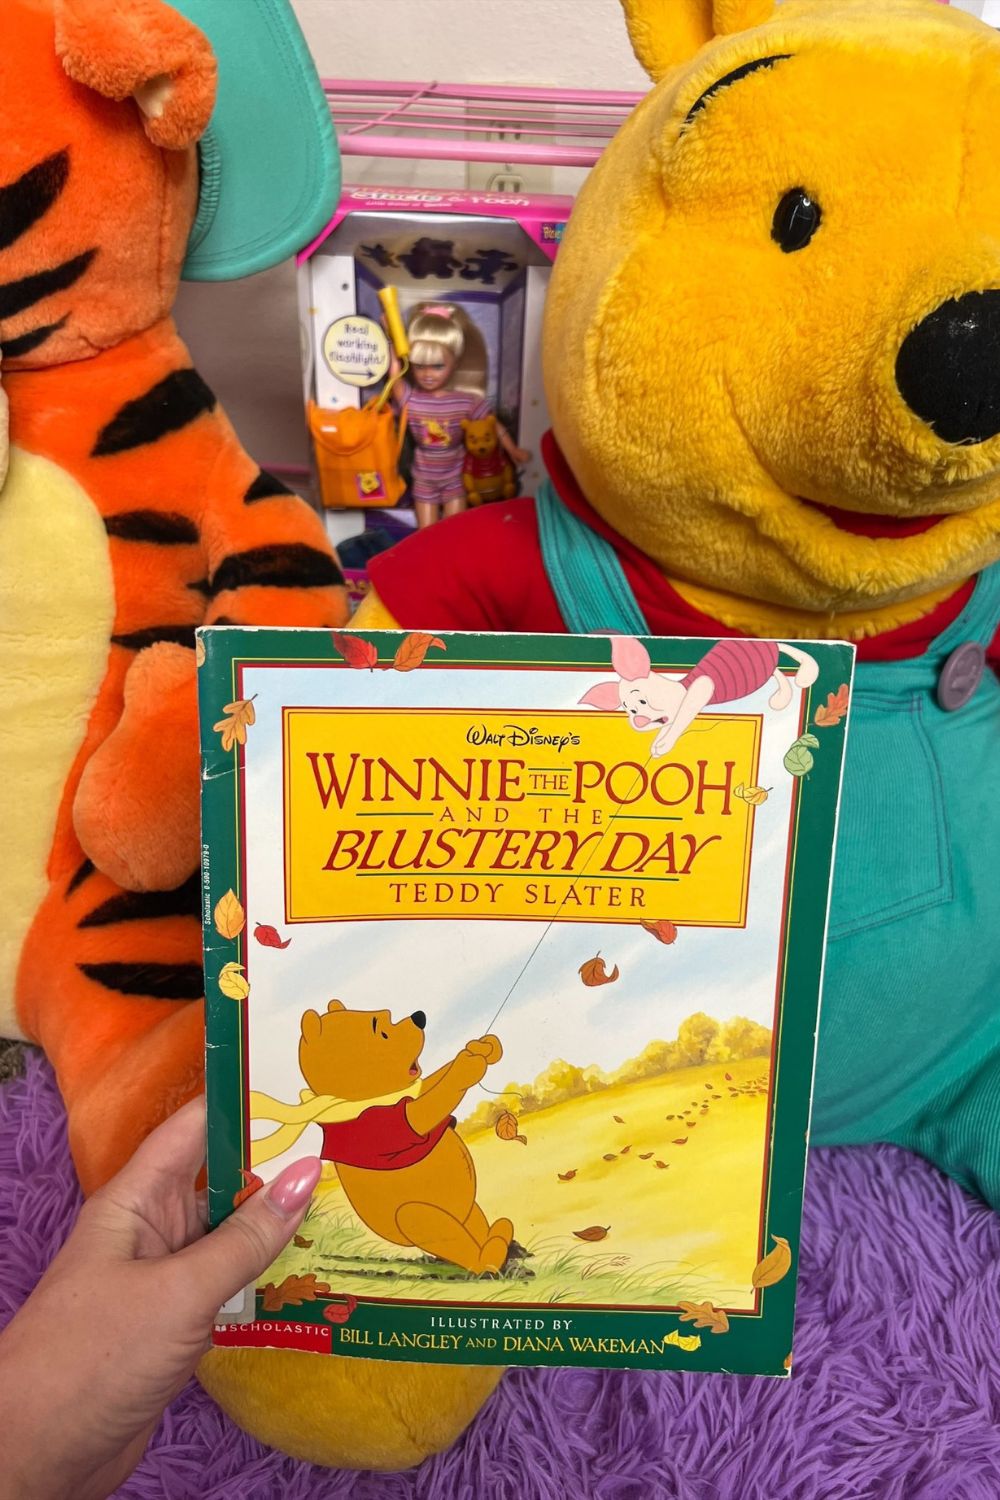 WINNIE THE POOH BOOK - BLUSTERY DAY*